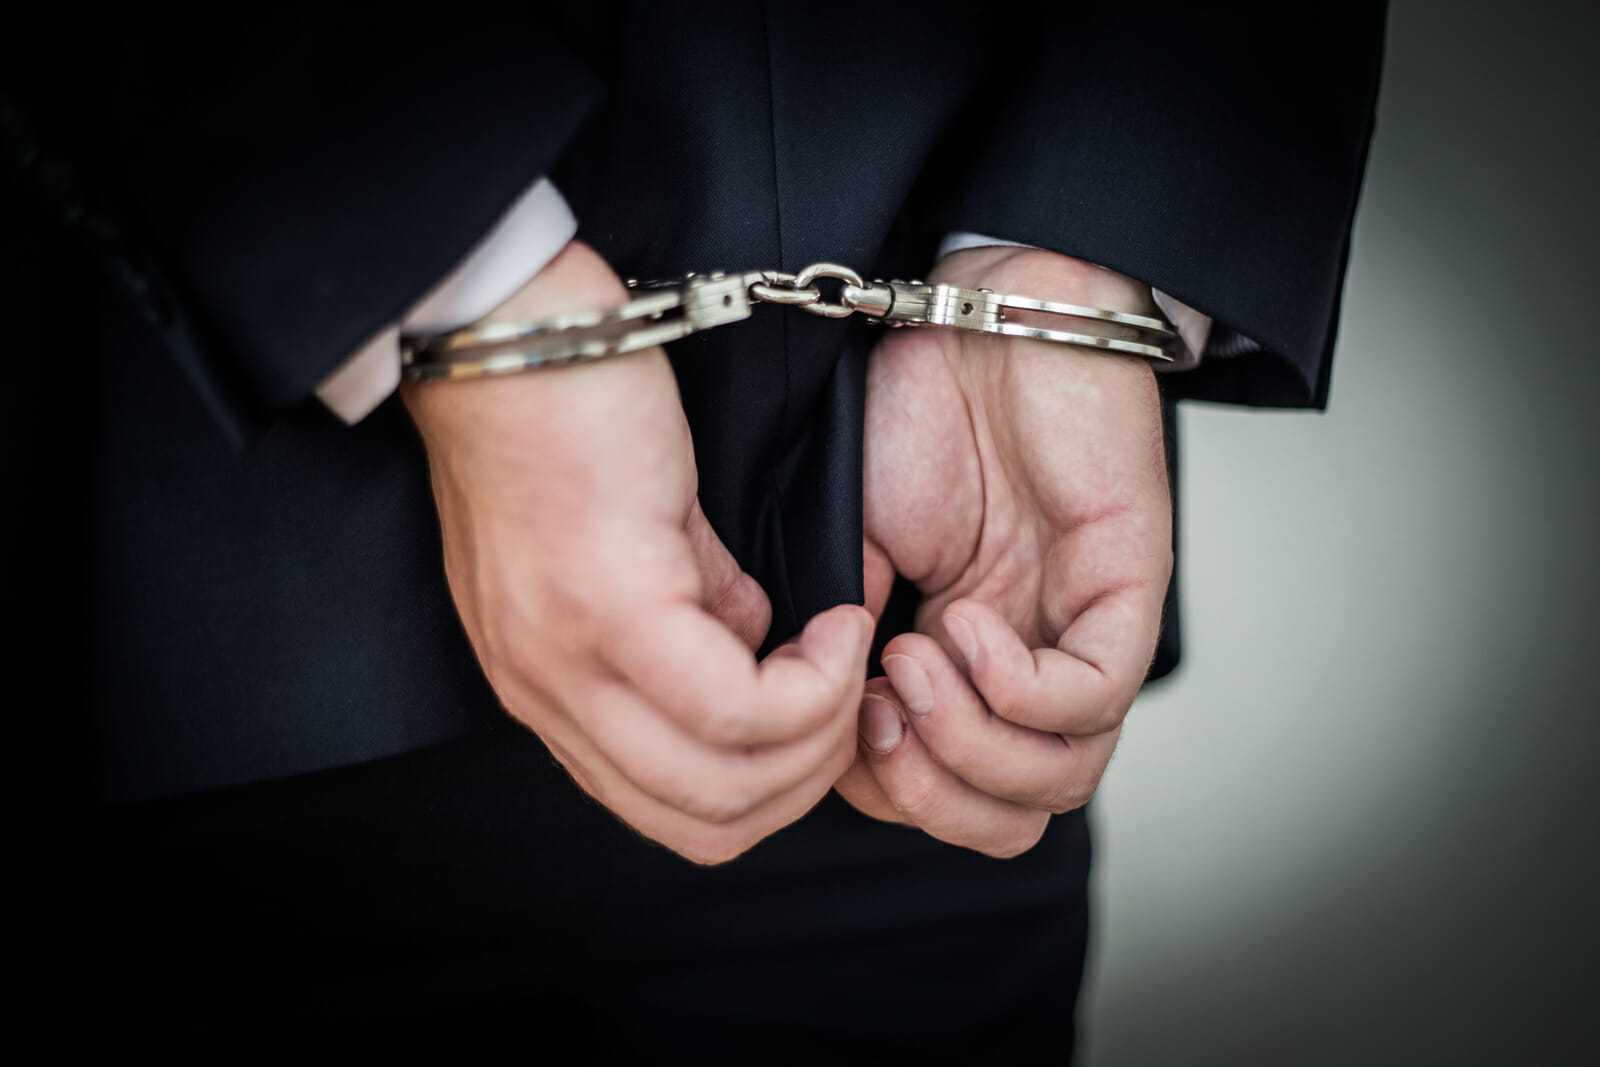 Las Vegas, NV Man Criminally Charged with Tax Evasion, Failure to File a Return